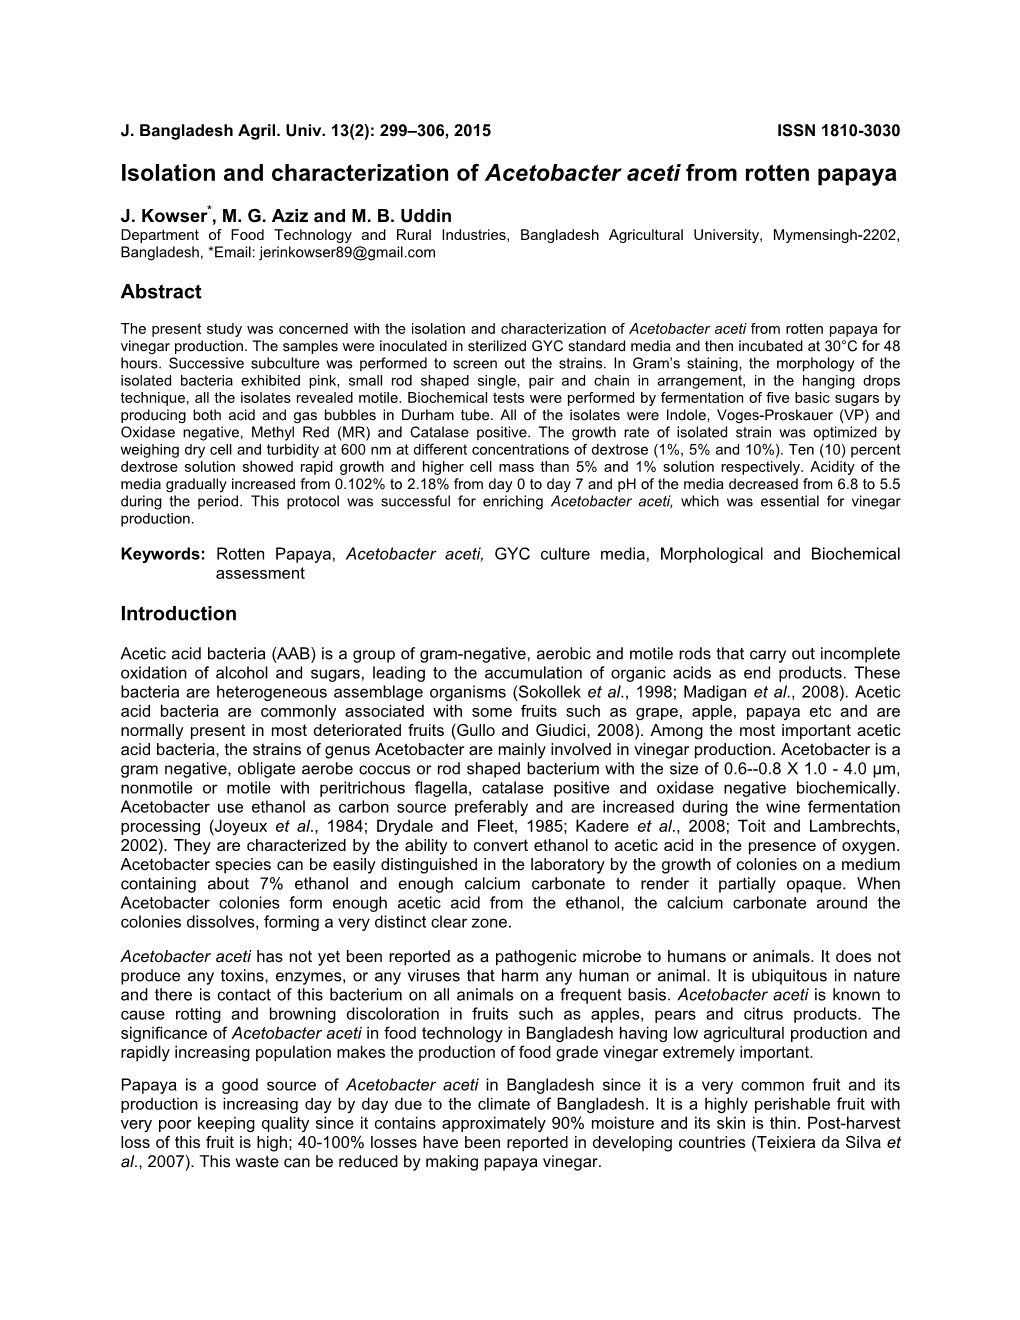 Isolation and Characterization of Acetobacter Aceti from Rotten Papaya